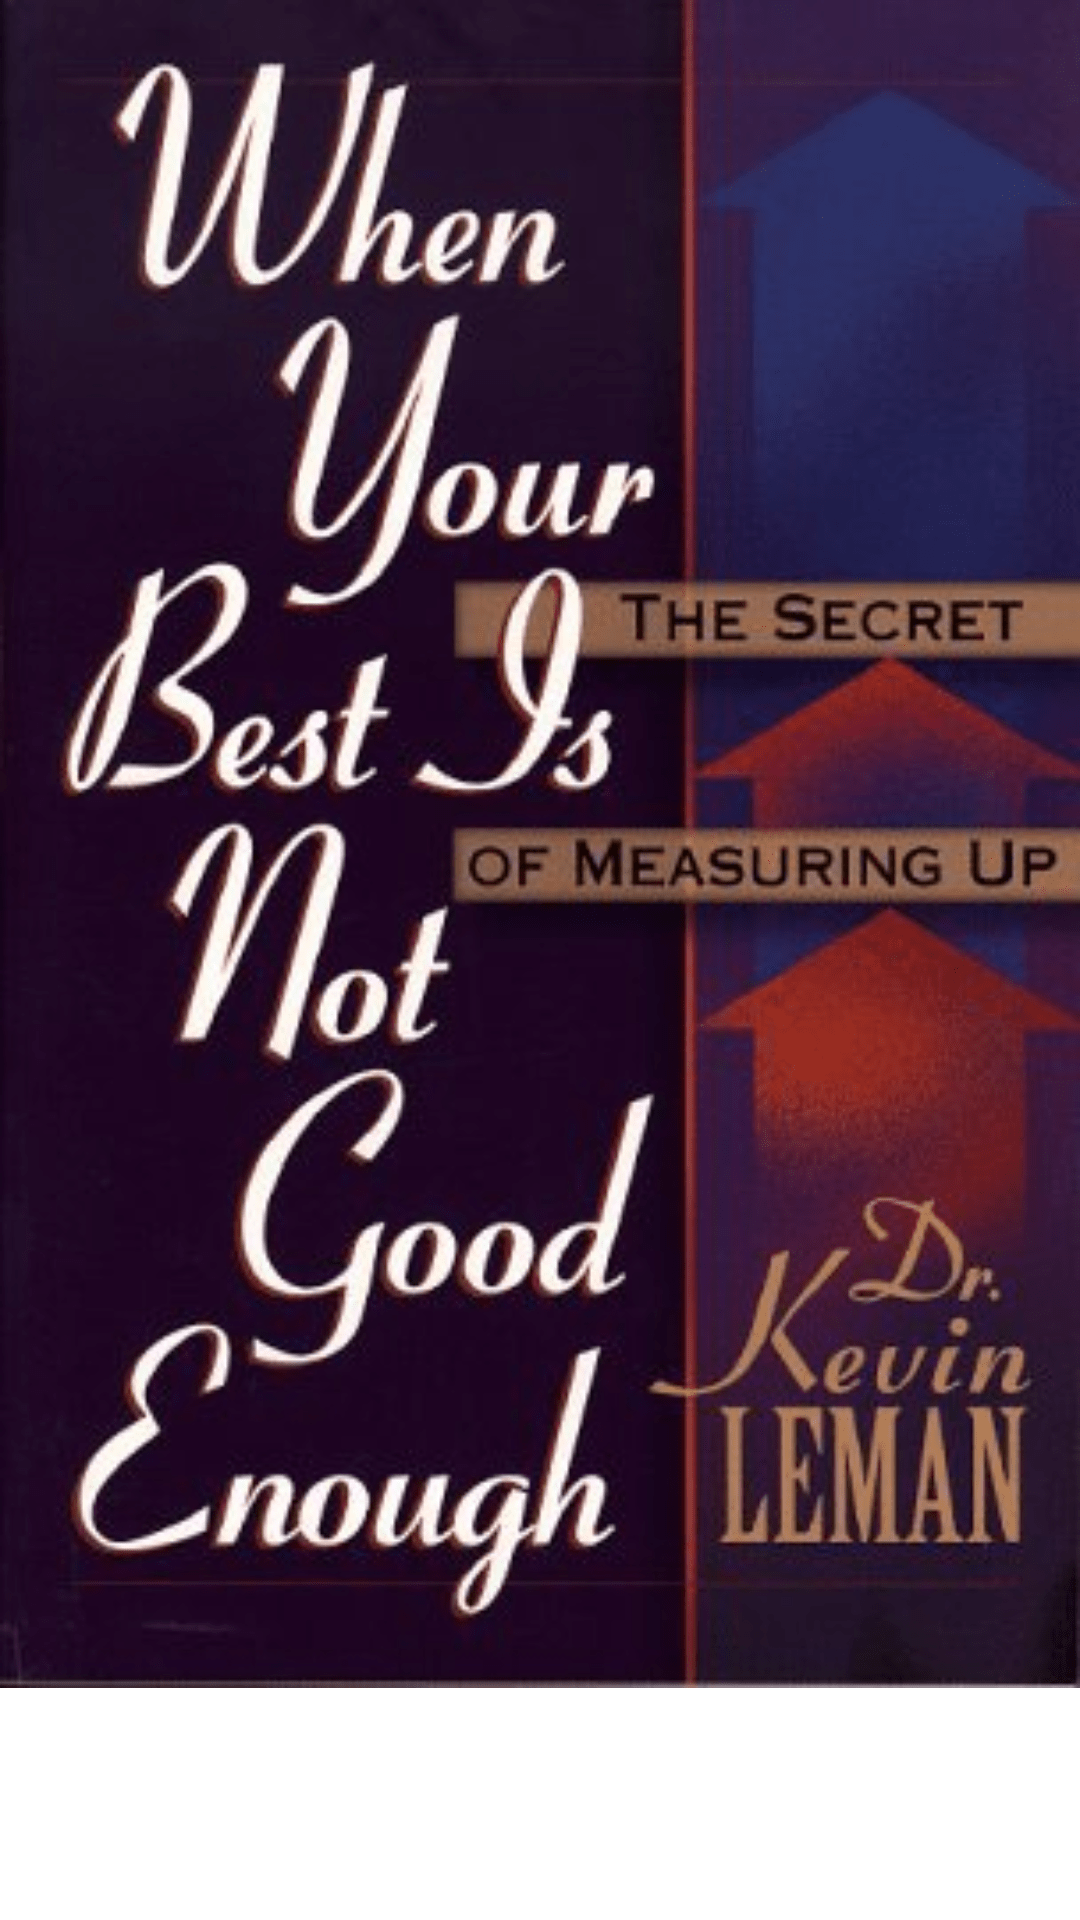 When Your Best Isn't Good Enough : The Secret of Measuring Up